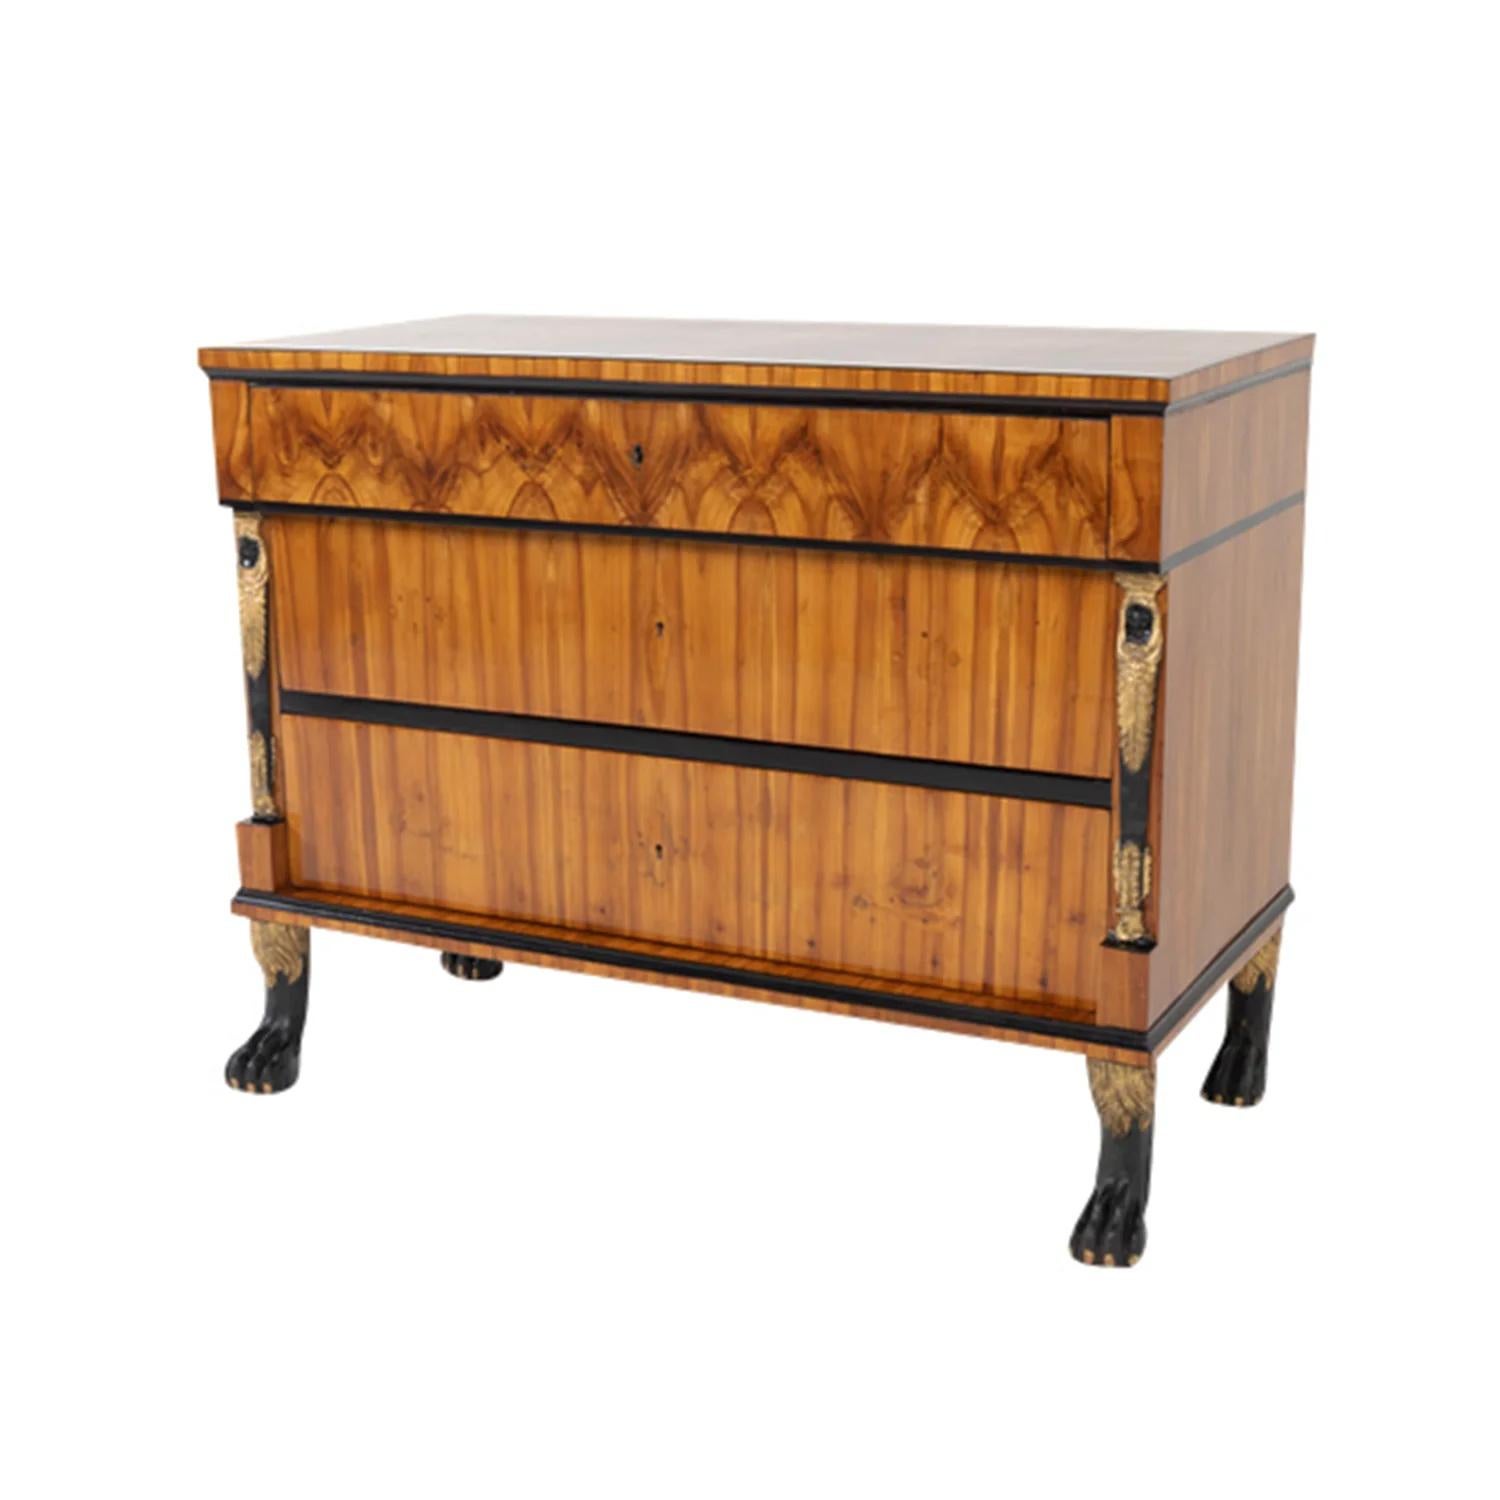 19th Century German Biedermeier Cherrywood Chest of Drawers - Antique Commode For Sale 1